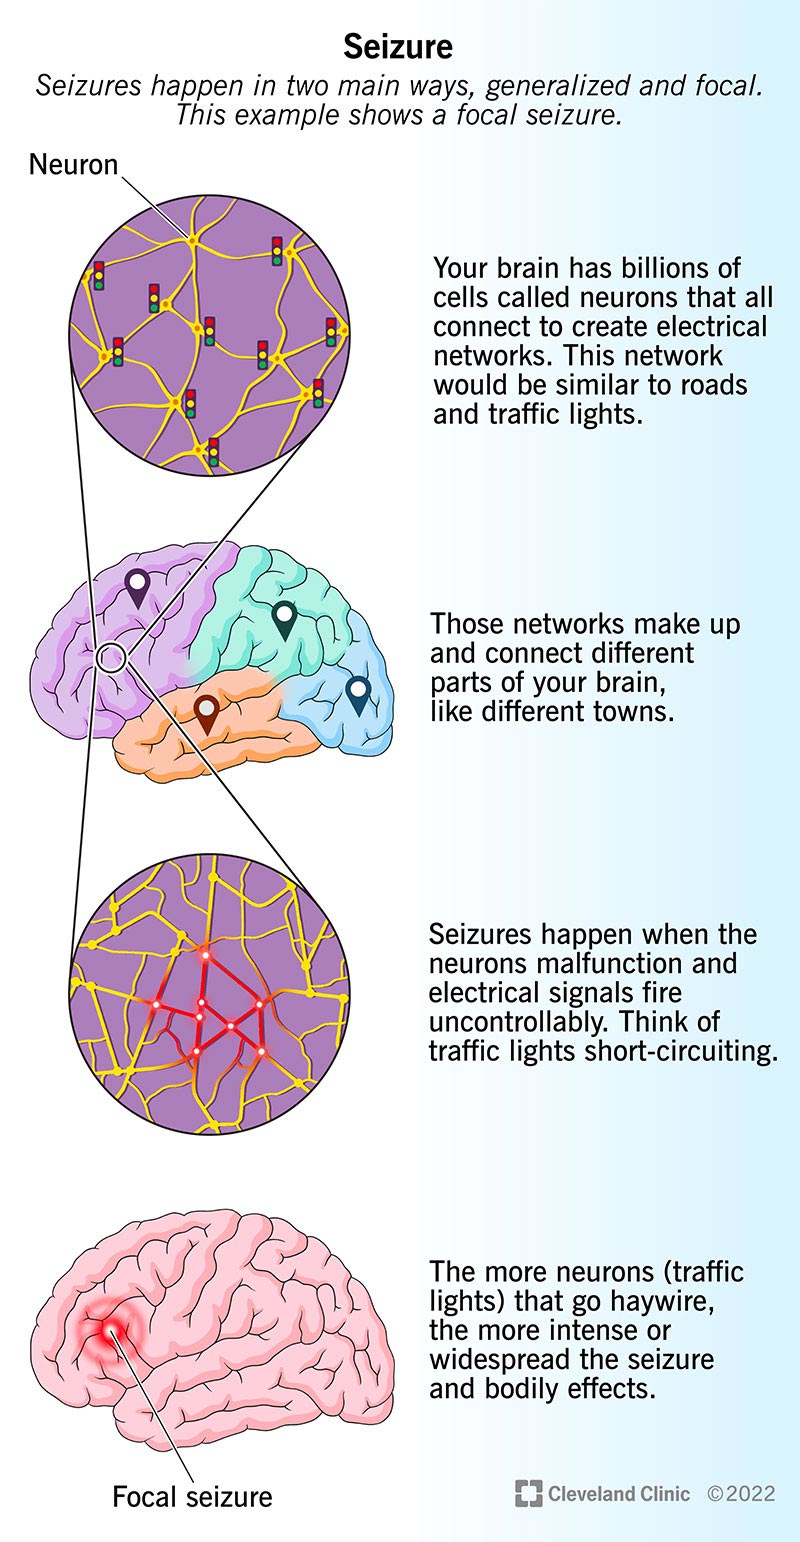 Your brain is made up of networks of neurons that send and relay electrical signals. Seizures disrupt the flow of those signals.